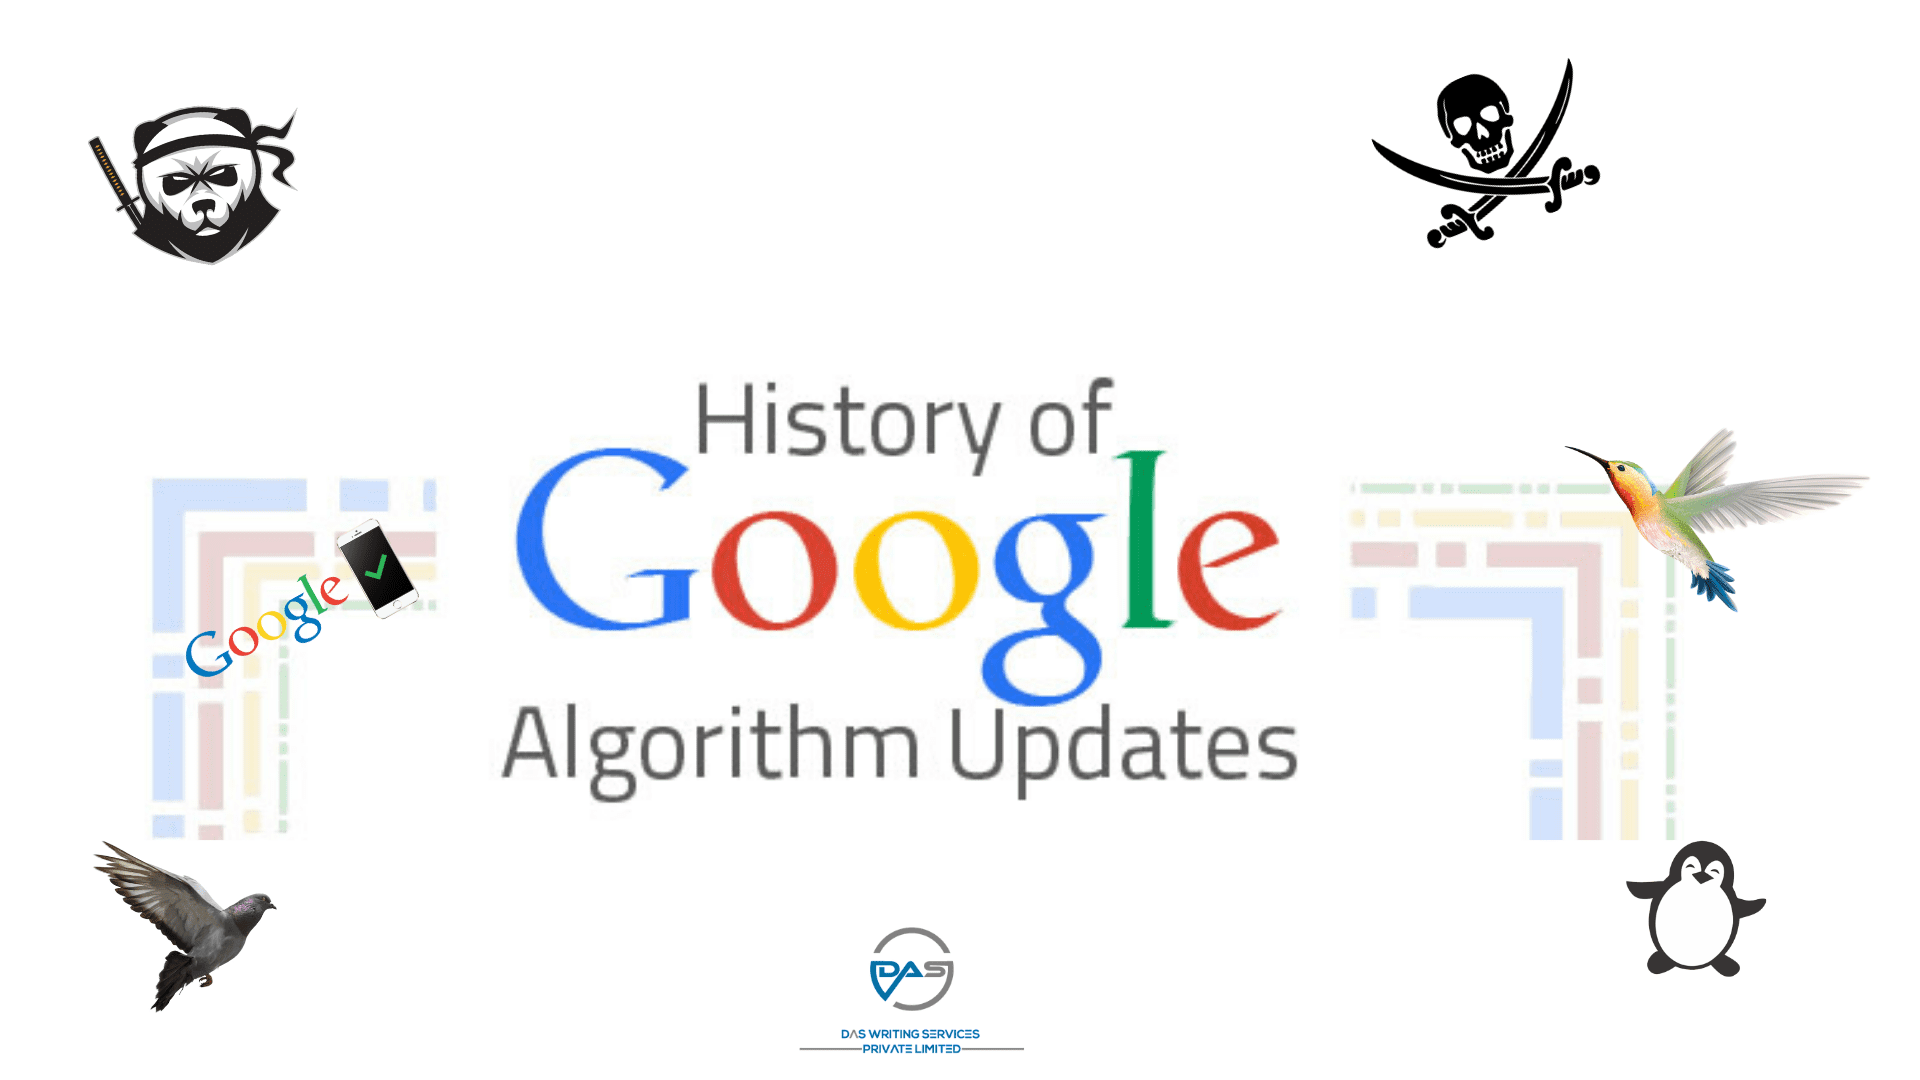 Google algorithm updates that writers must know to develop quality content